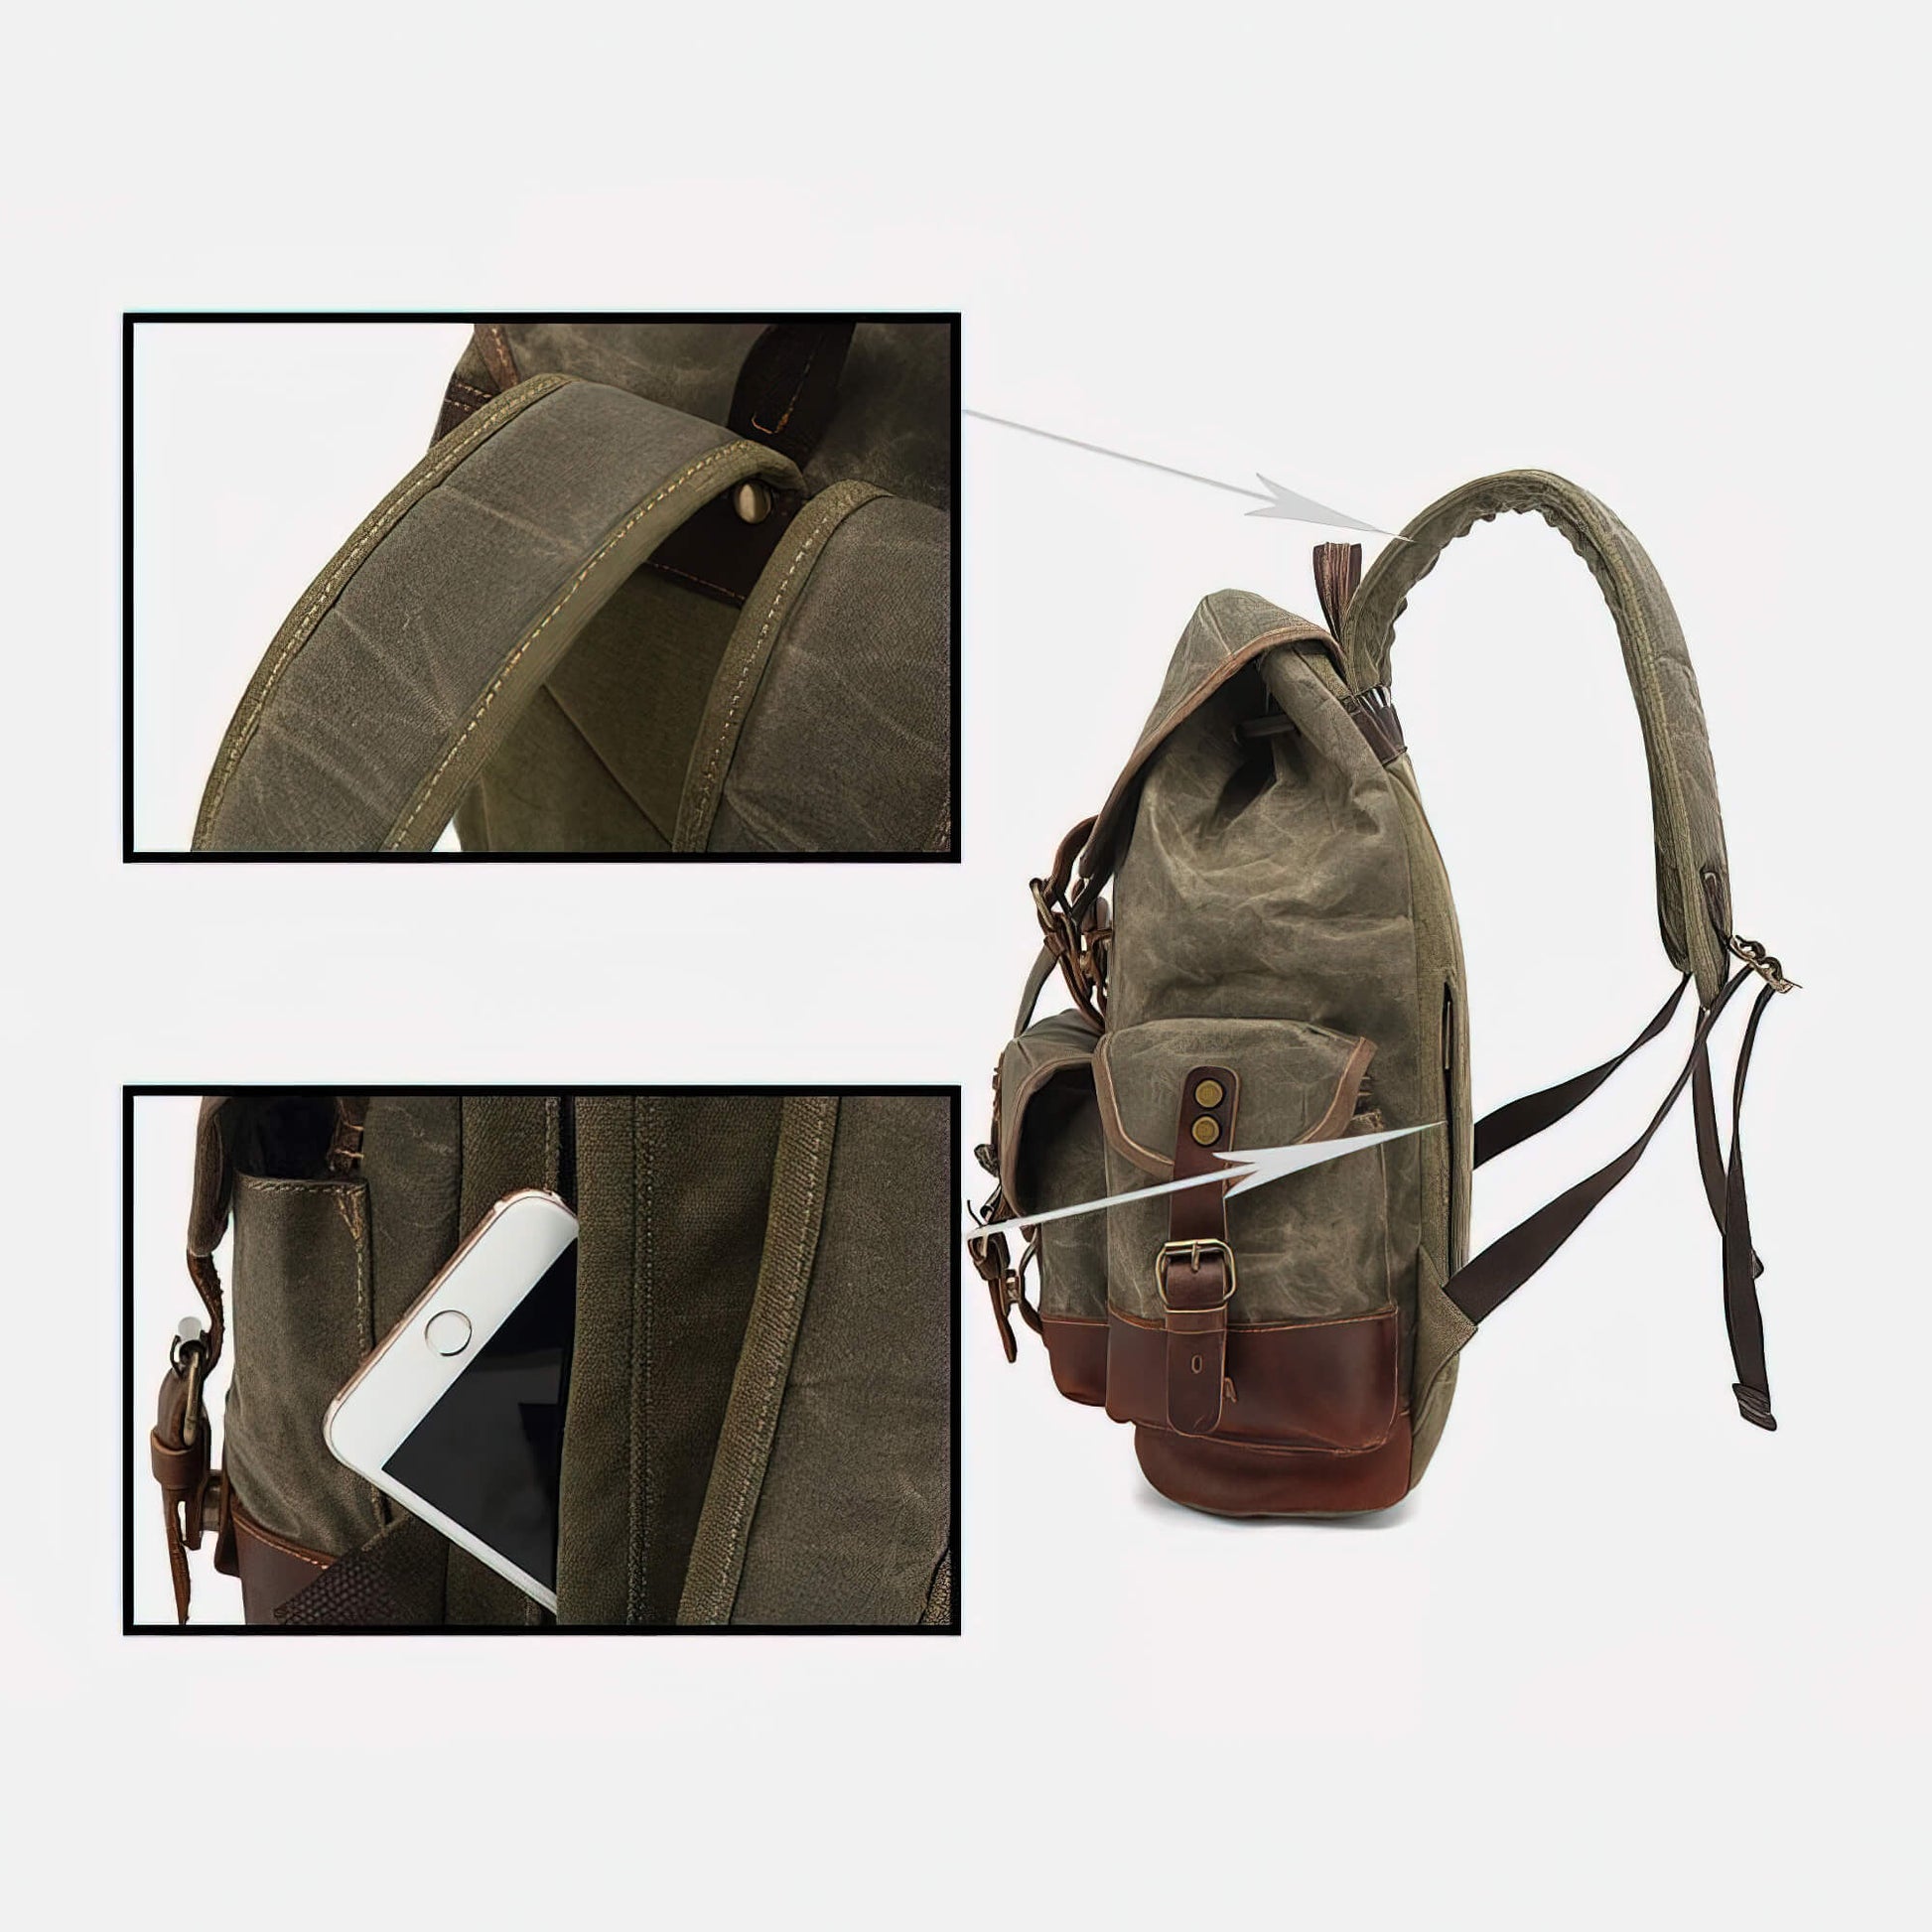 Waxed Canvas Backpack Rucksack 30L - Large Capacity, Genuine